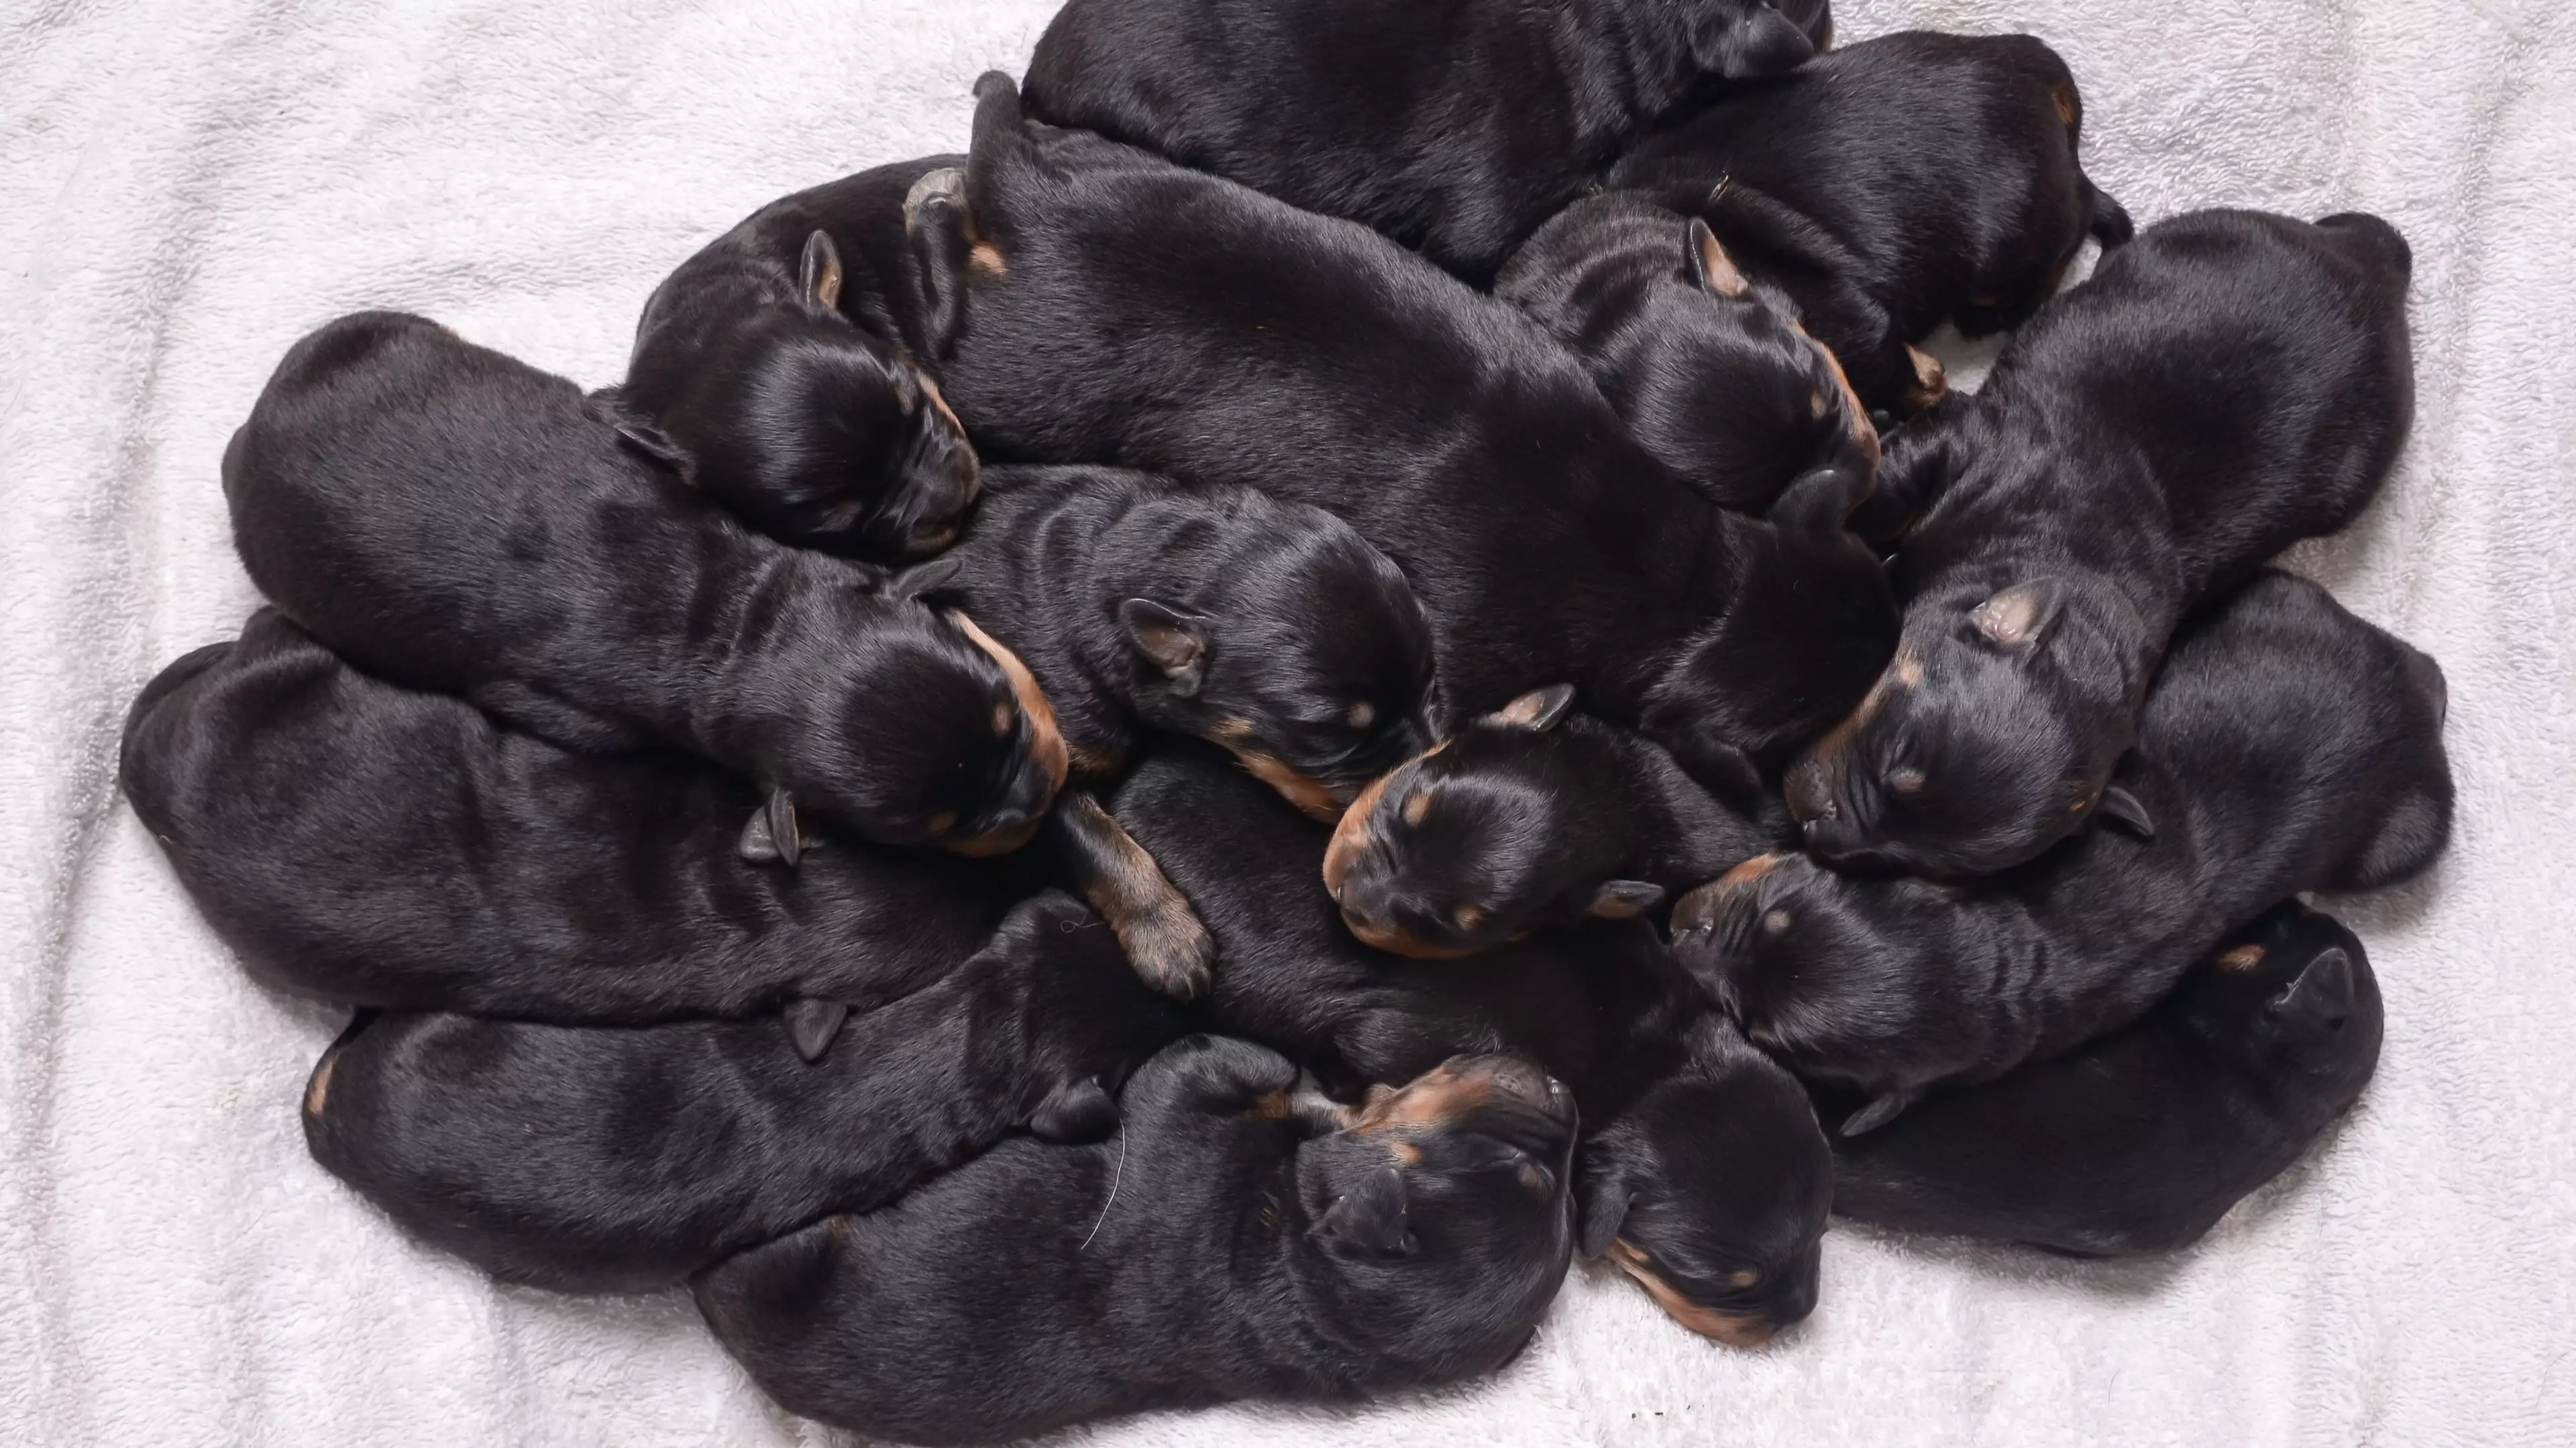 Rottweiler Giving Birth To More Than A Dozen Puppies Is As Amazing As You Think